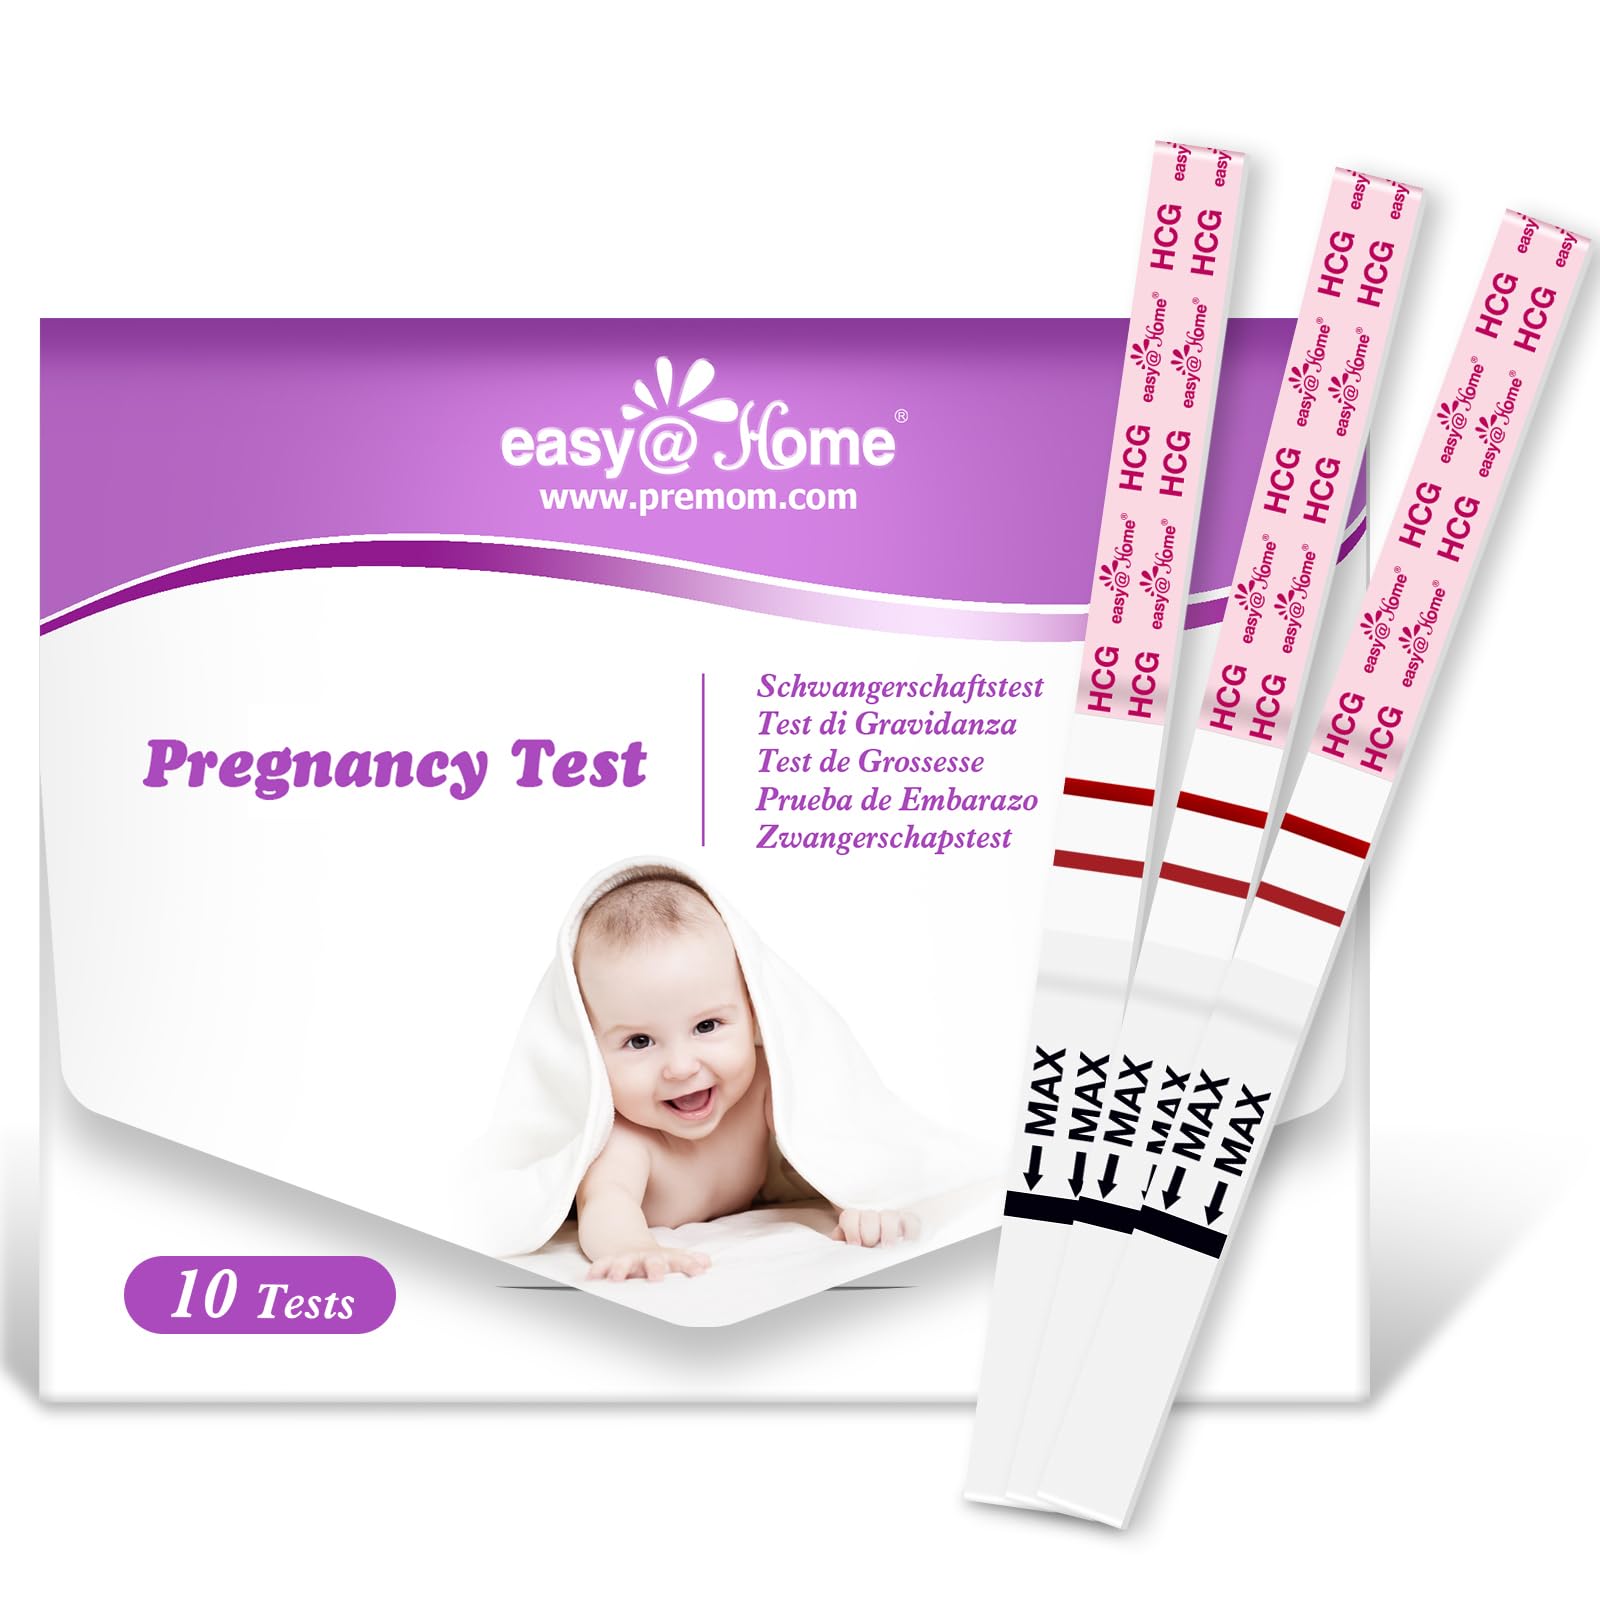 Pregnancy Detection Test Strips Kit: Easy Home 10 HCG Tests 10miu/ml  Powered by Accurate Fertility Tracker iOS and Android Premom App 10HCG